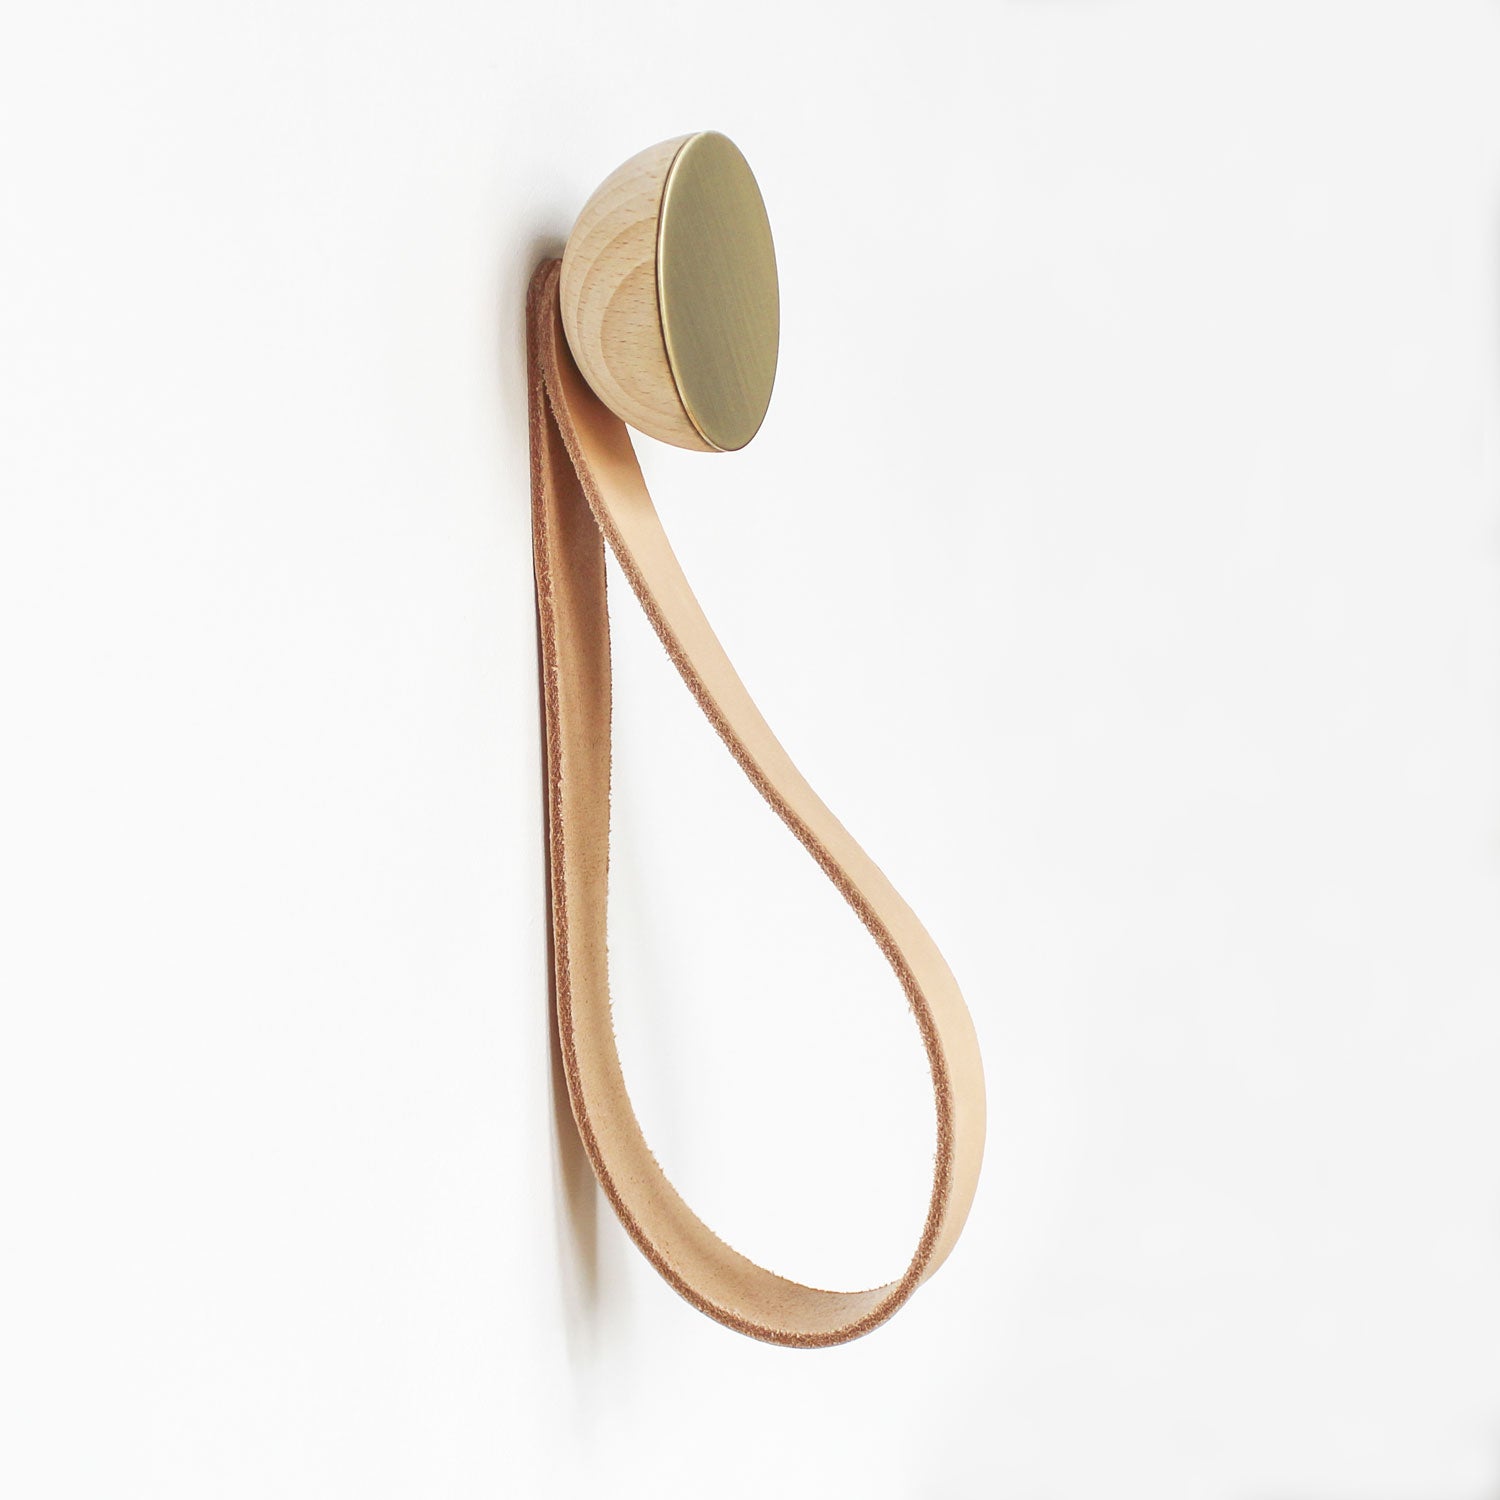 Small Leather Strap Brass Ring Wall Hook Wall Hanging Storage